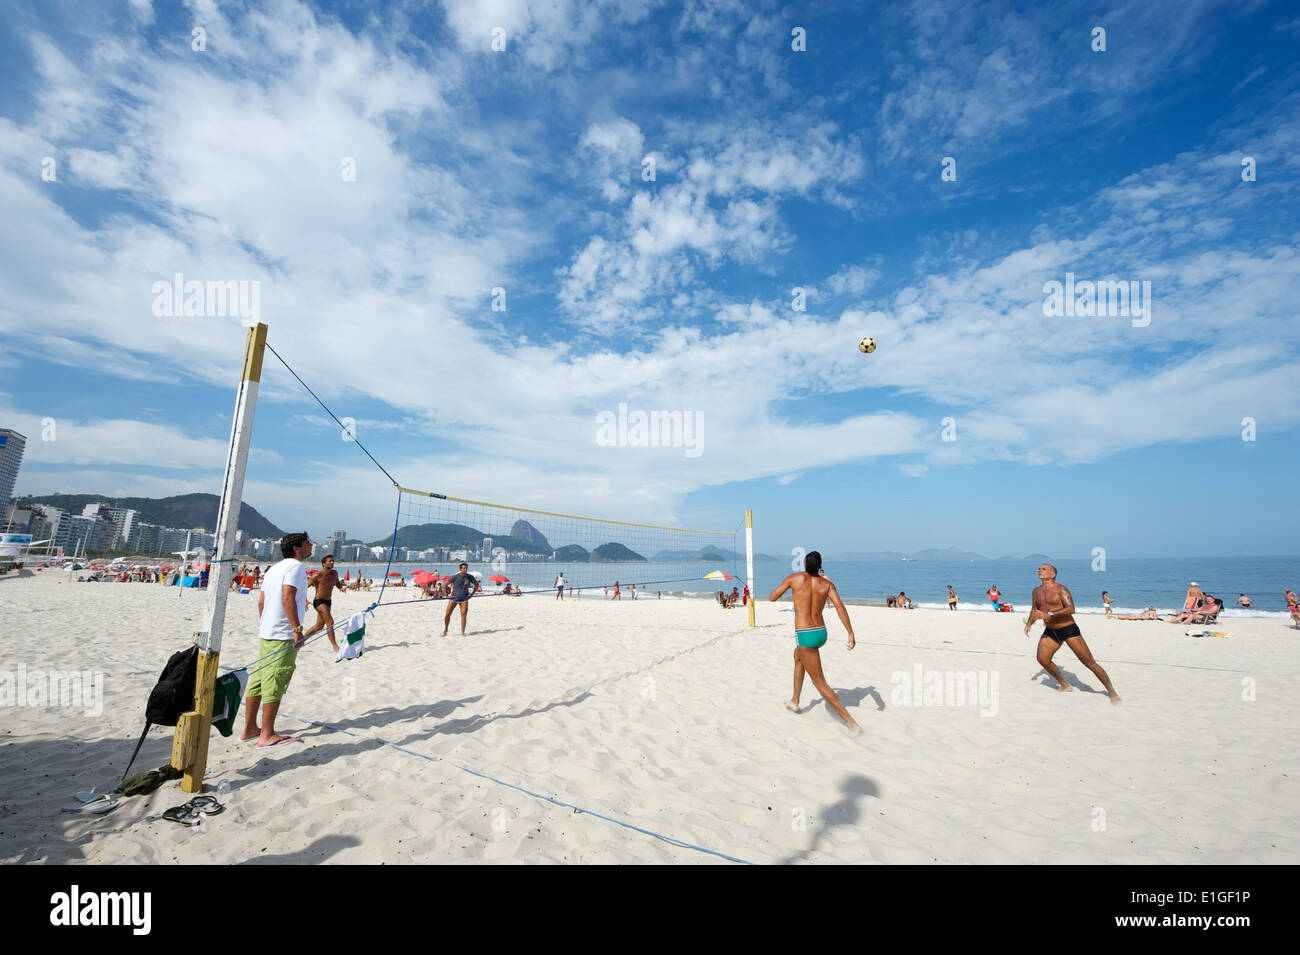 RIO DE JANEIRO, BRAZIL - CIRCA JANUARY, 2011: Young Brazilian men play a game of footvolley, a sport that combines football and Stock Photo